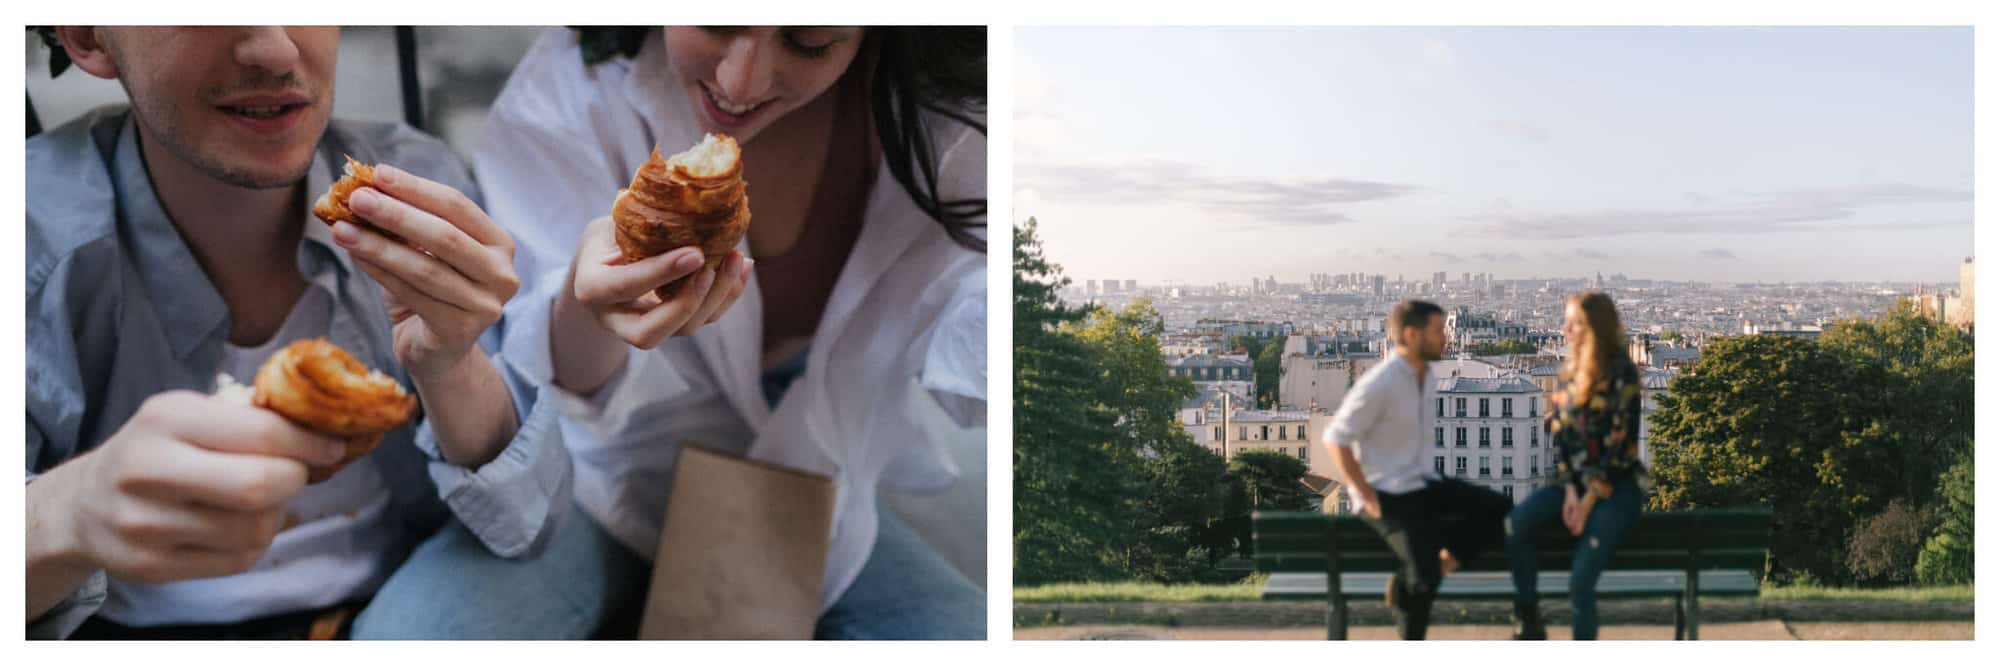 Left: A man and a woman are both eating their croissants. Right: A couple are sitting by a green bench overlooking the Parisian skyline.